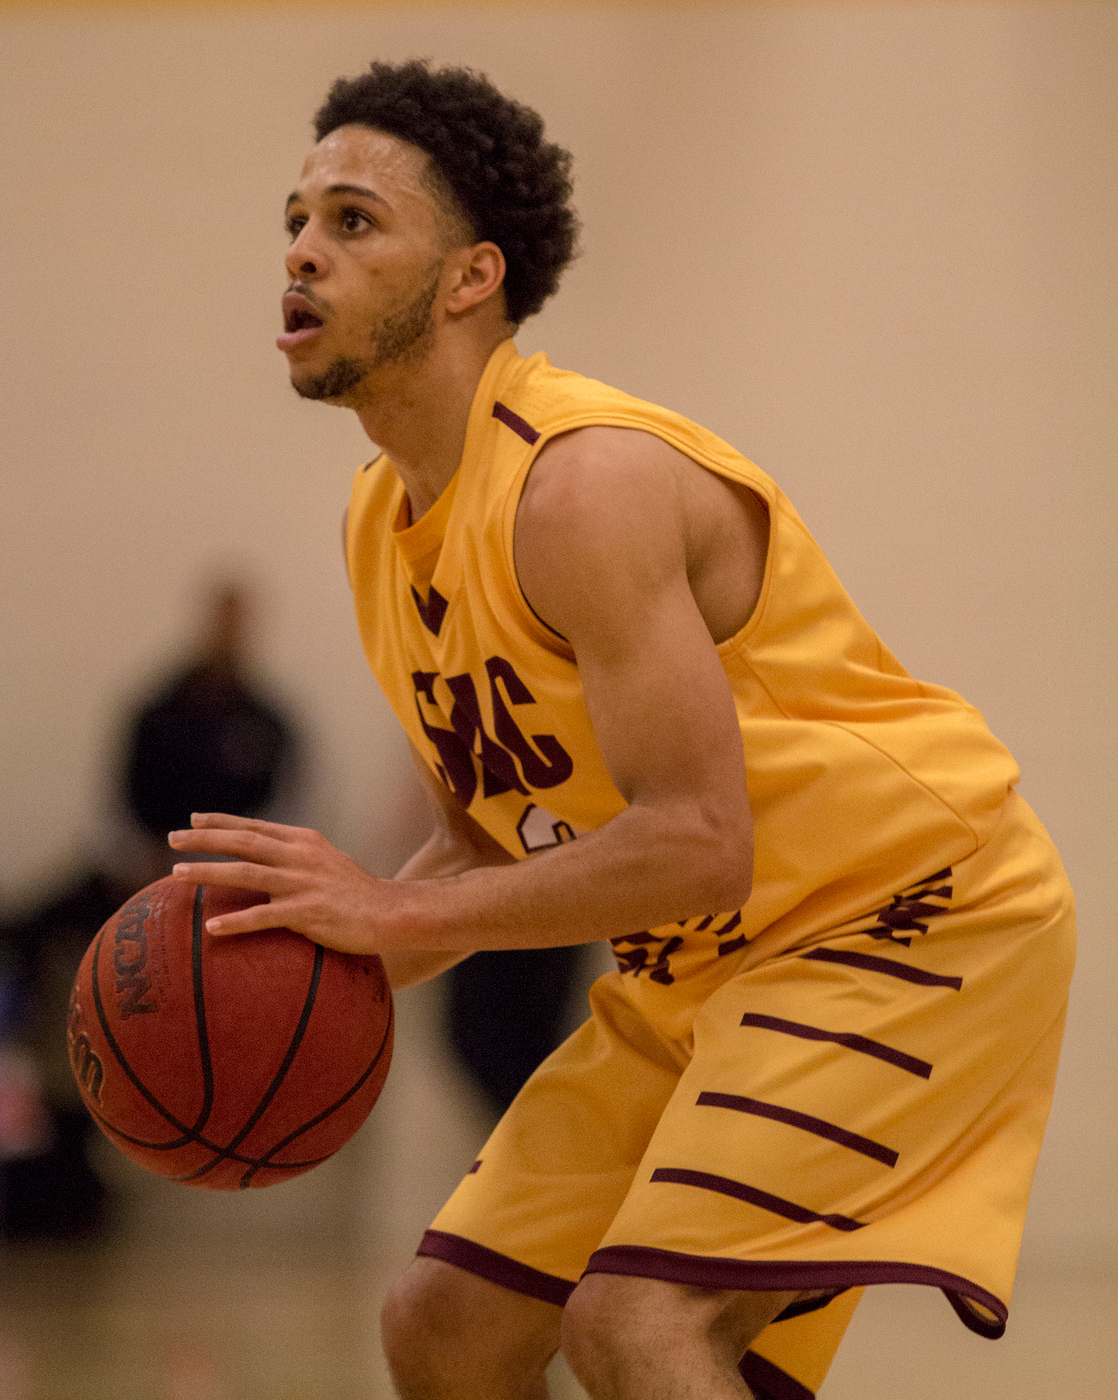 City College guard Devin Joseph pulls up for the 3-pointer in the game against Diablo Valley College Feb. 11, 2016. Photo Courtesy: Kris Hooks | Khooks3825@gmail.com